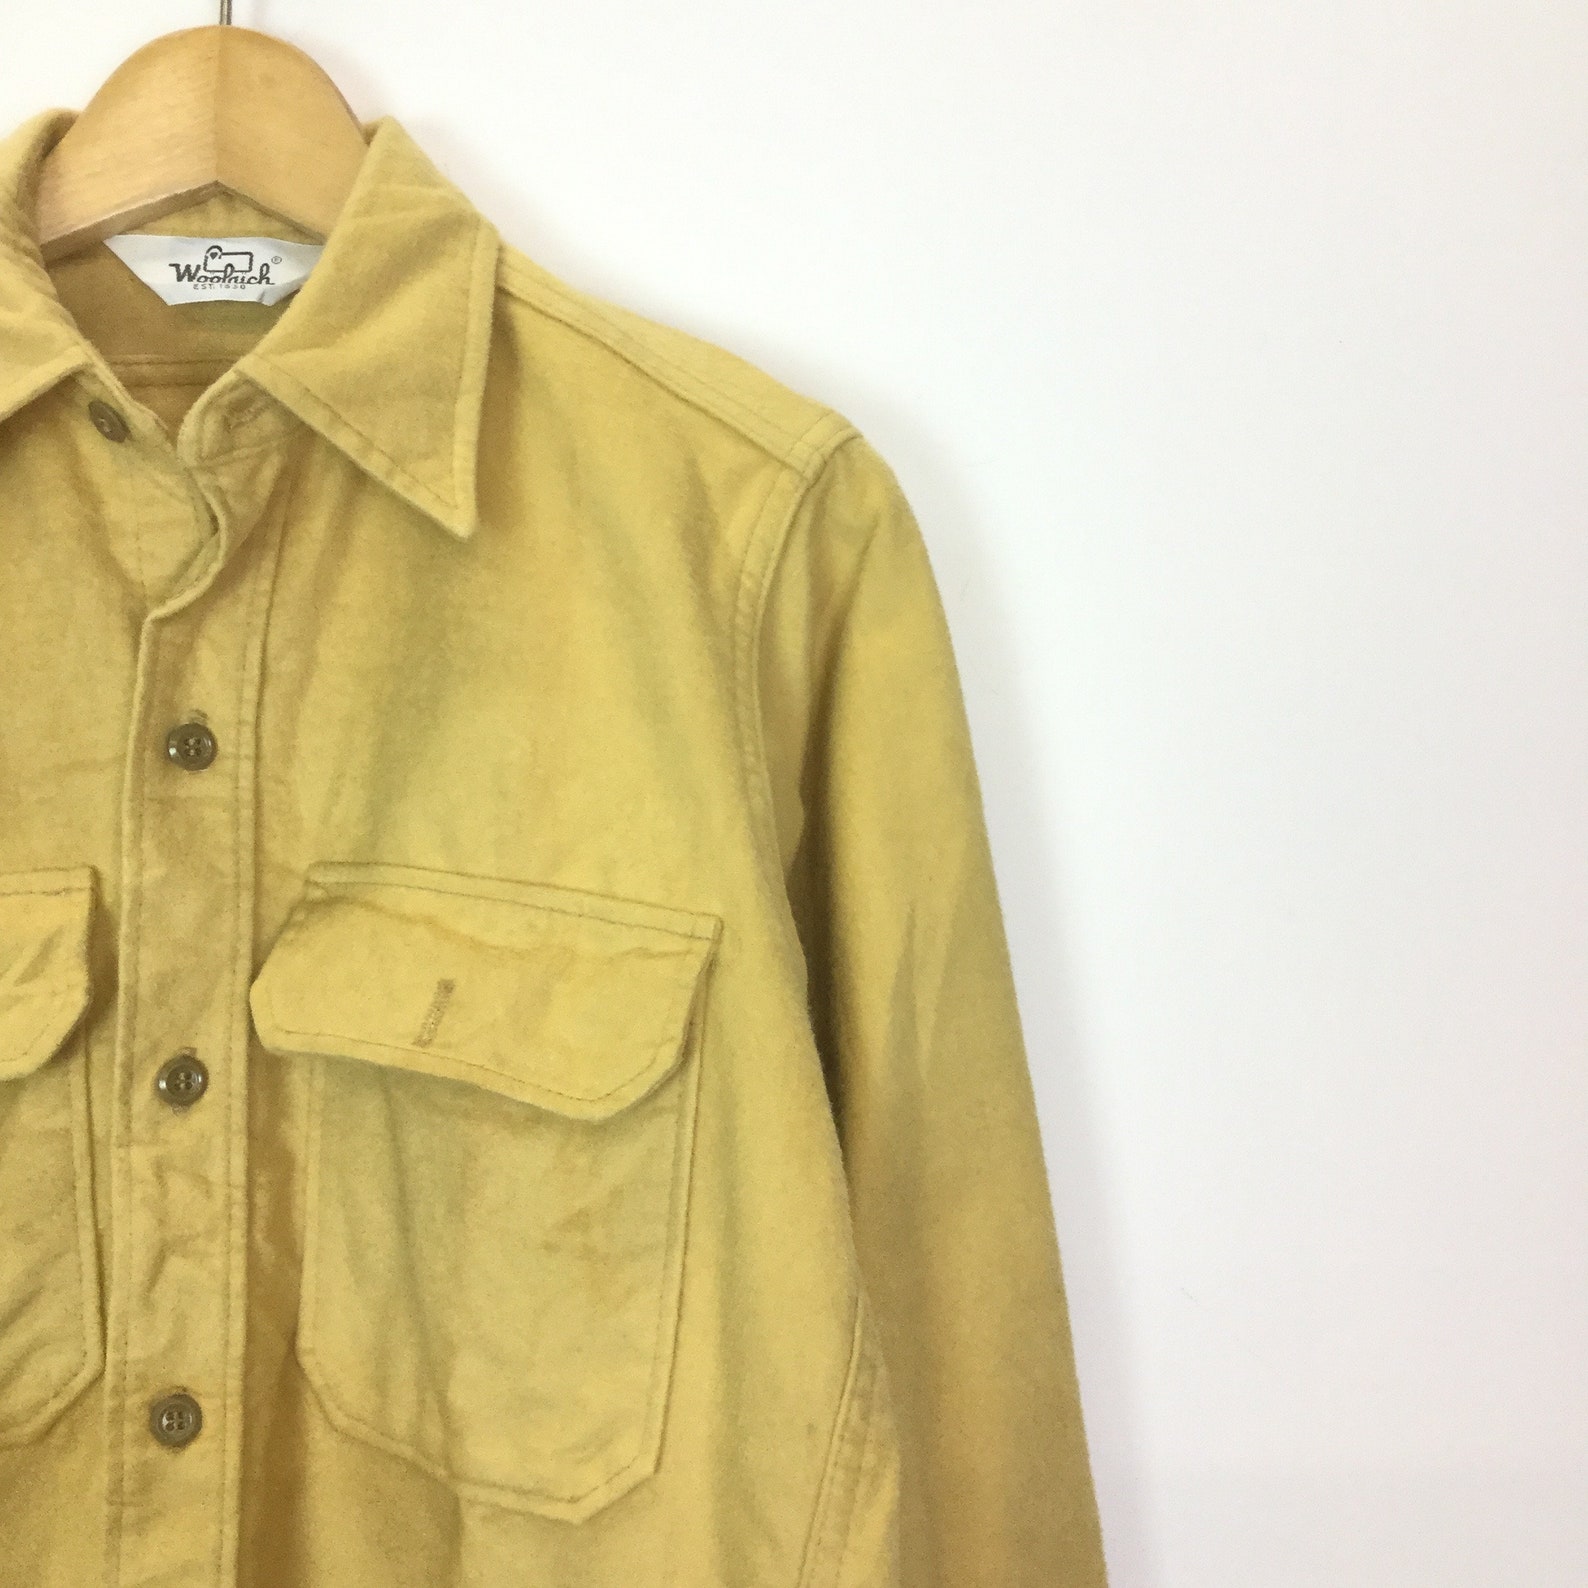 Vintage Woolrich Yellow Shirt | Etsy